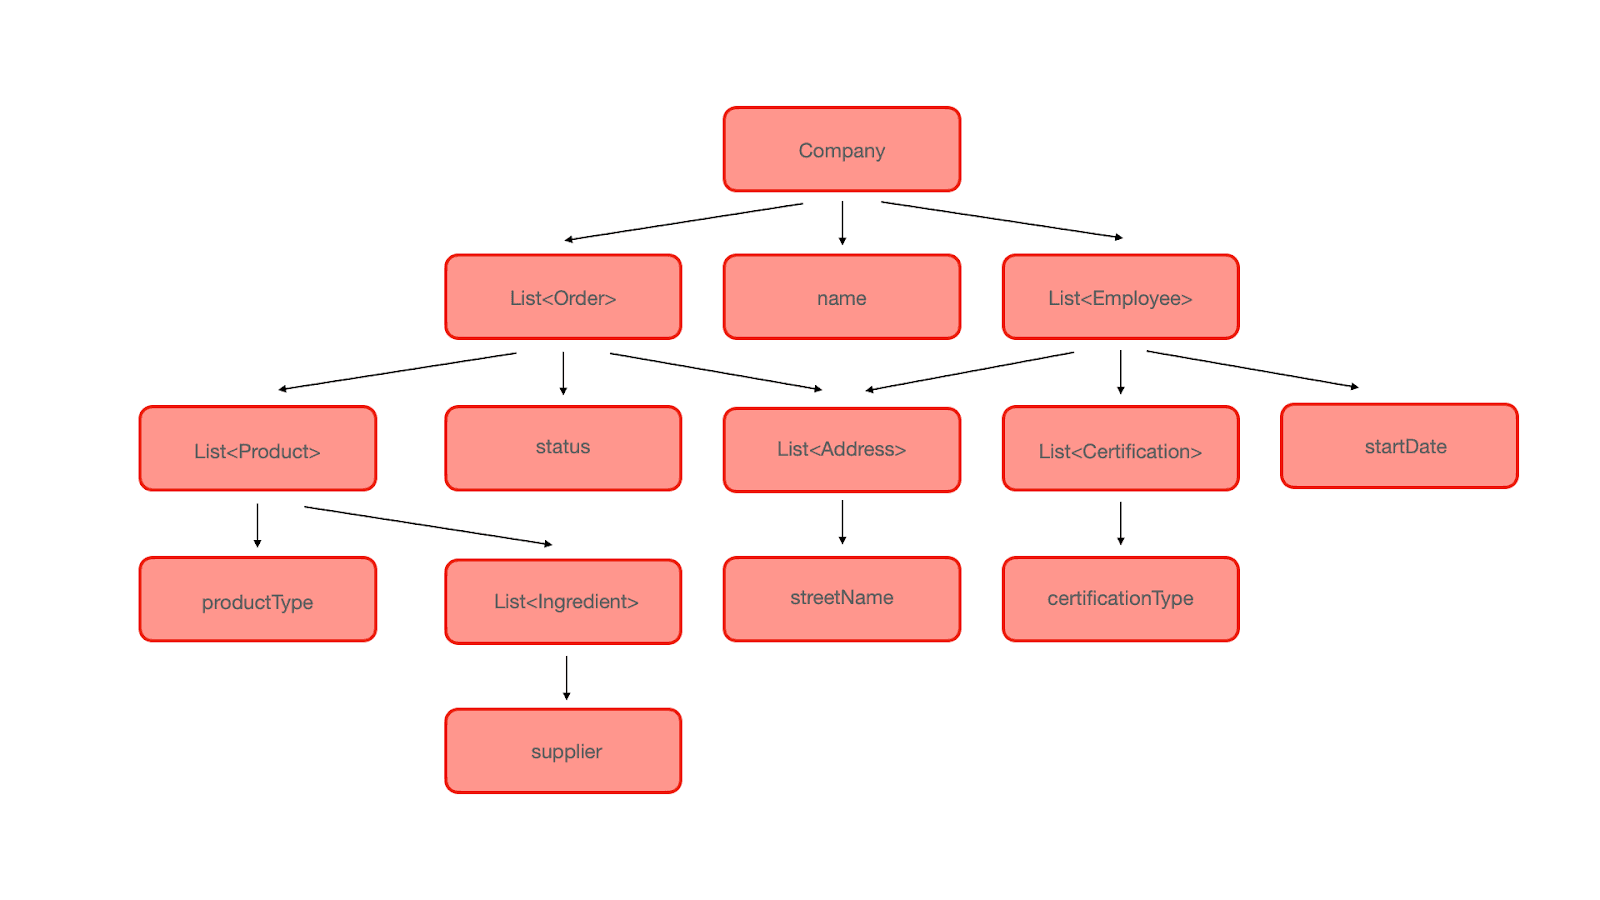 Graph showing that all sub-components of the object are selected